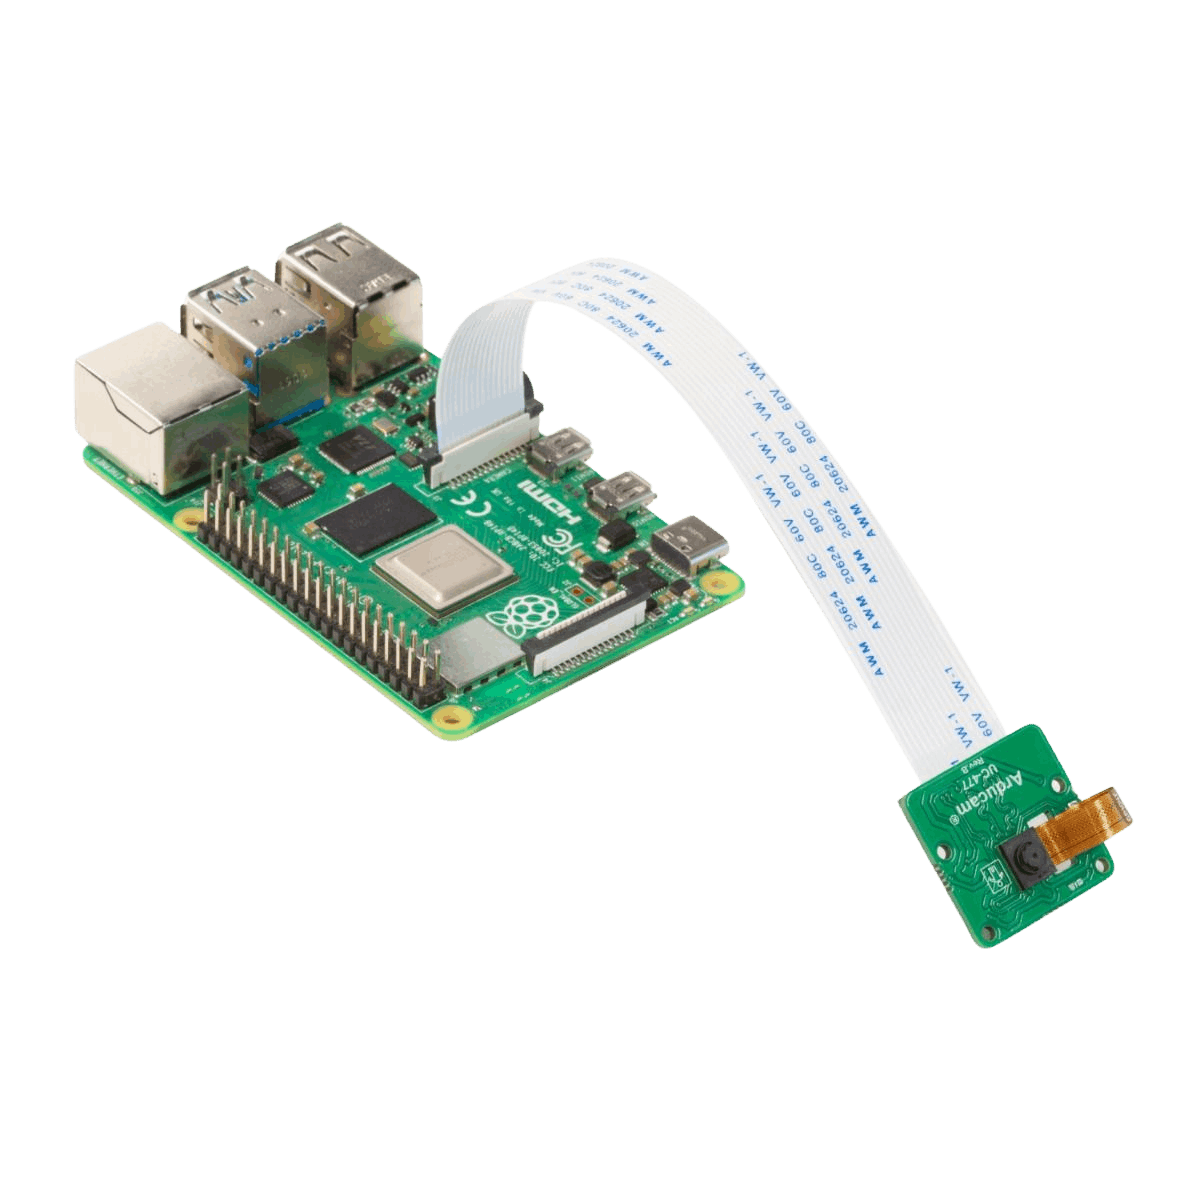 B0206 connected to the Raspberry Pi